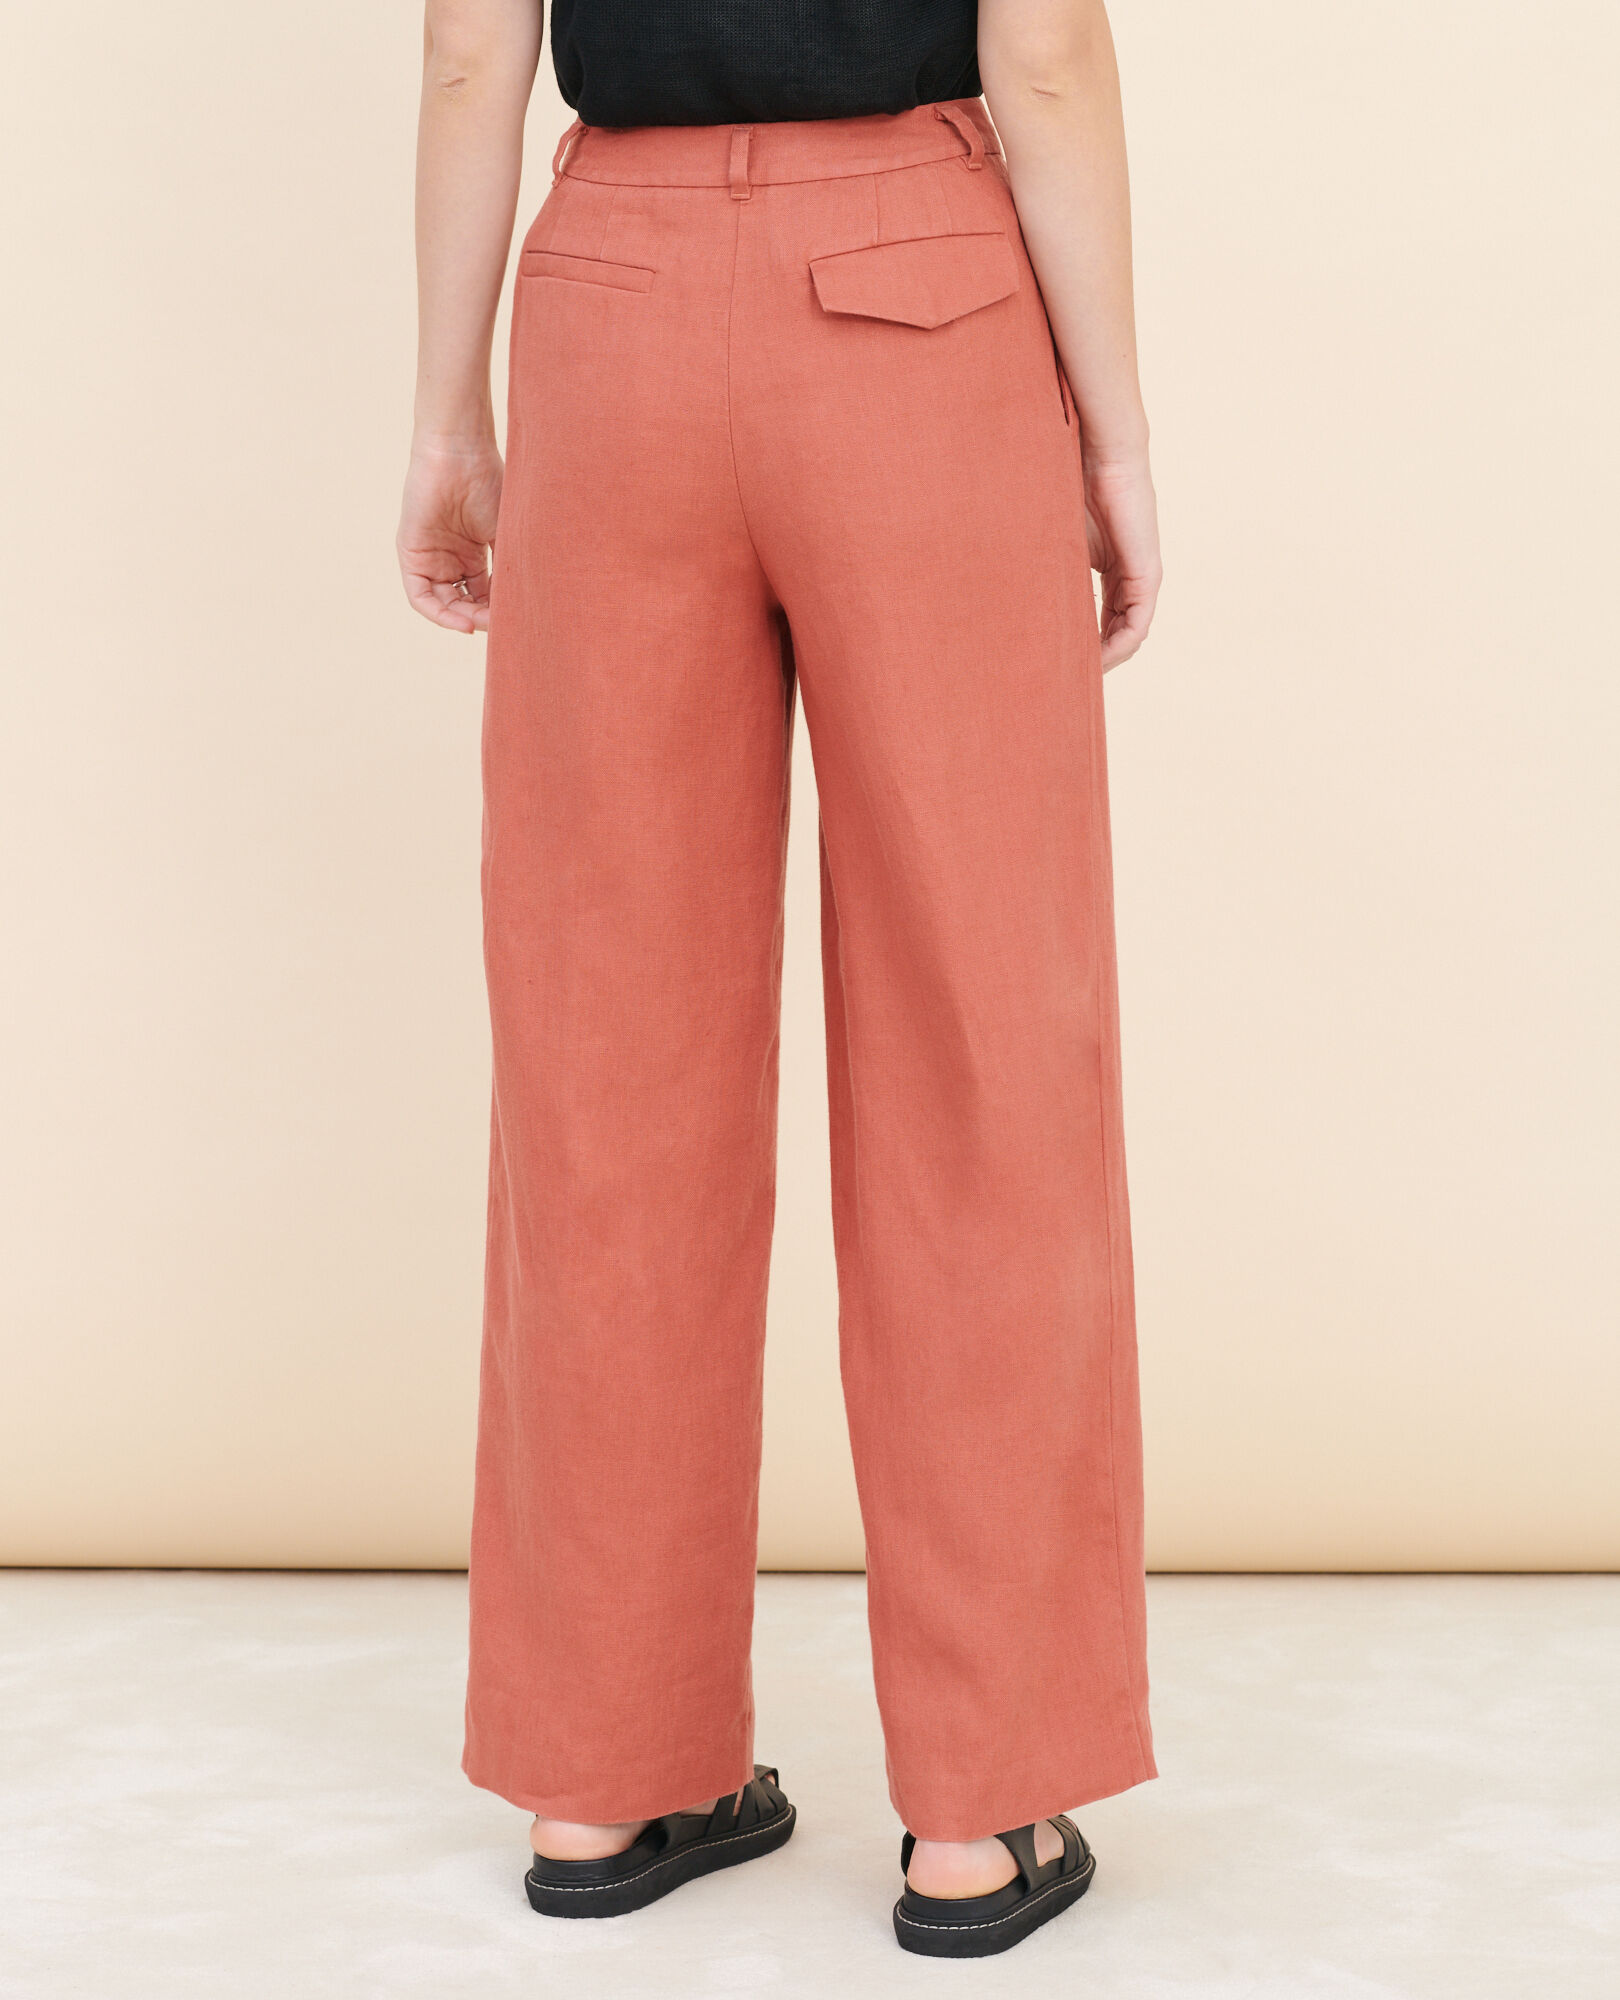 YVONNE - Wide linen trousers 13 red 2spa396f03